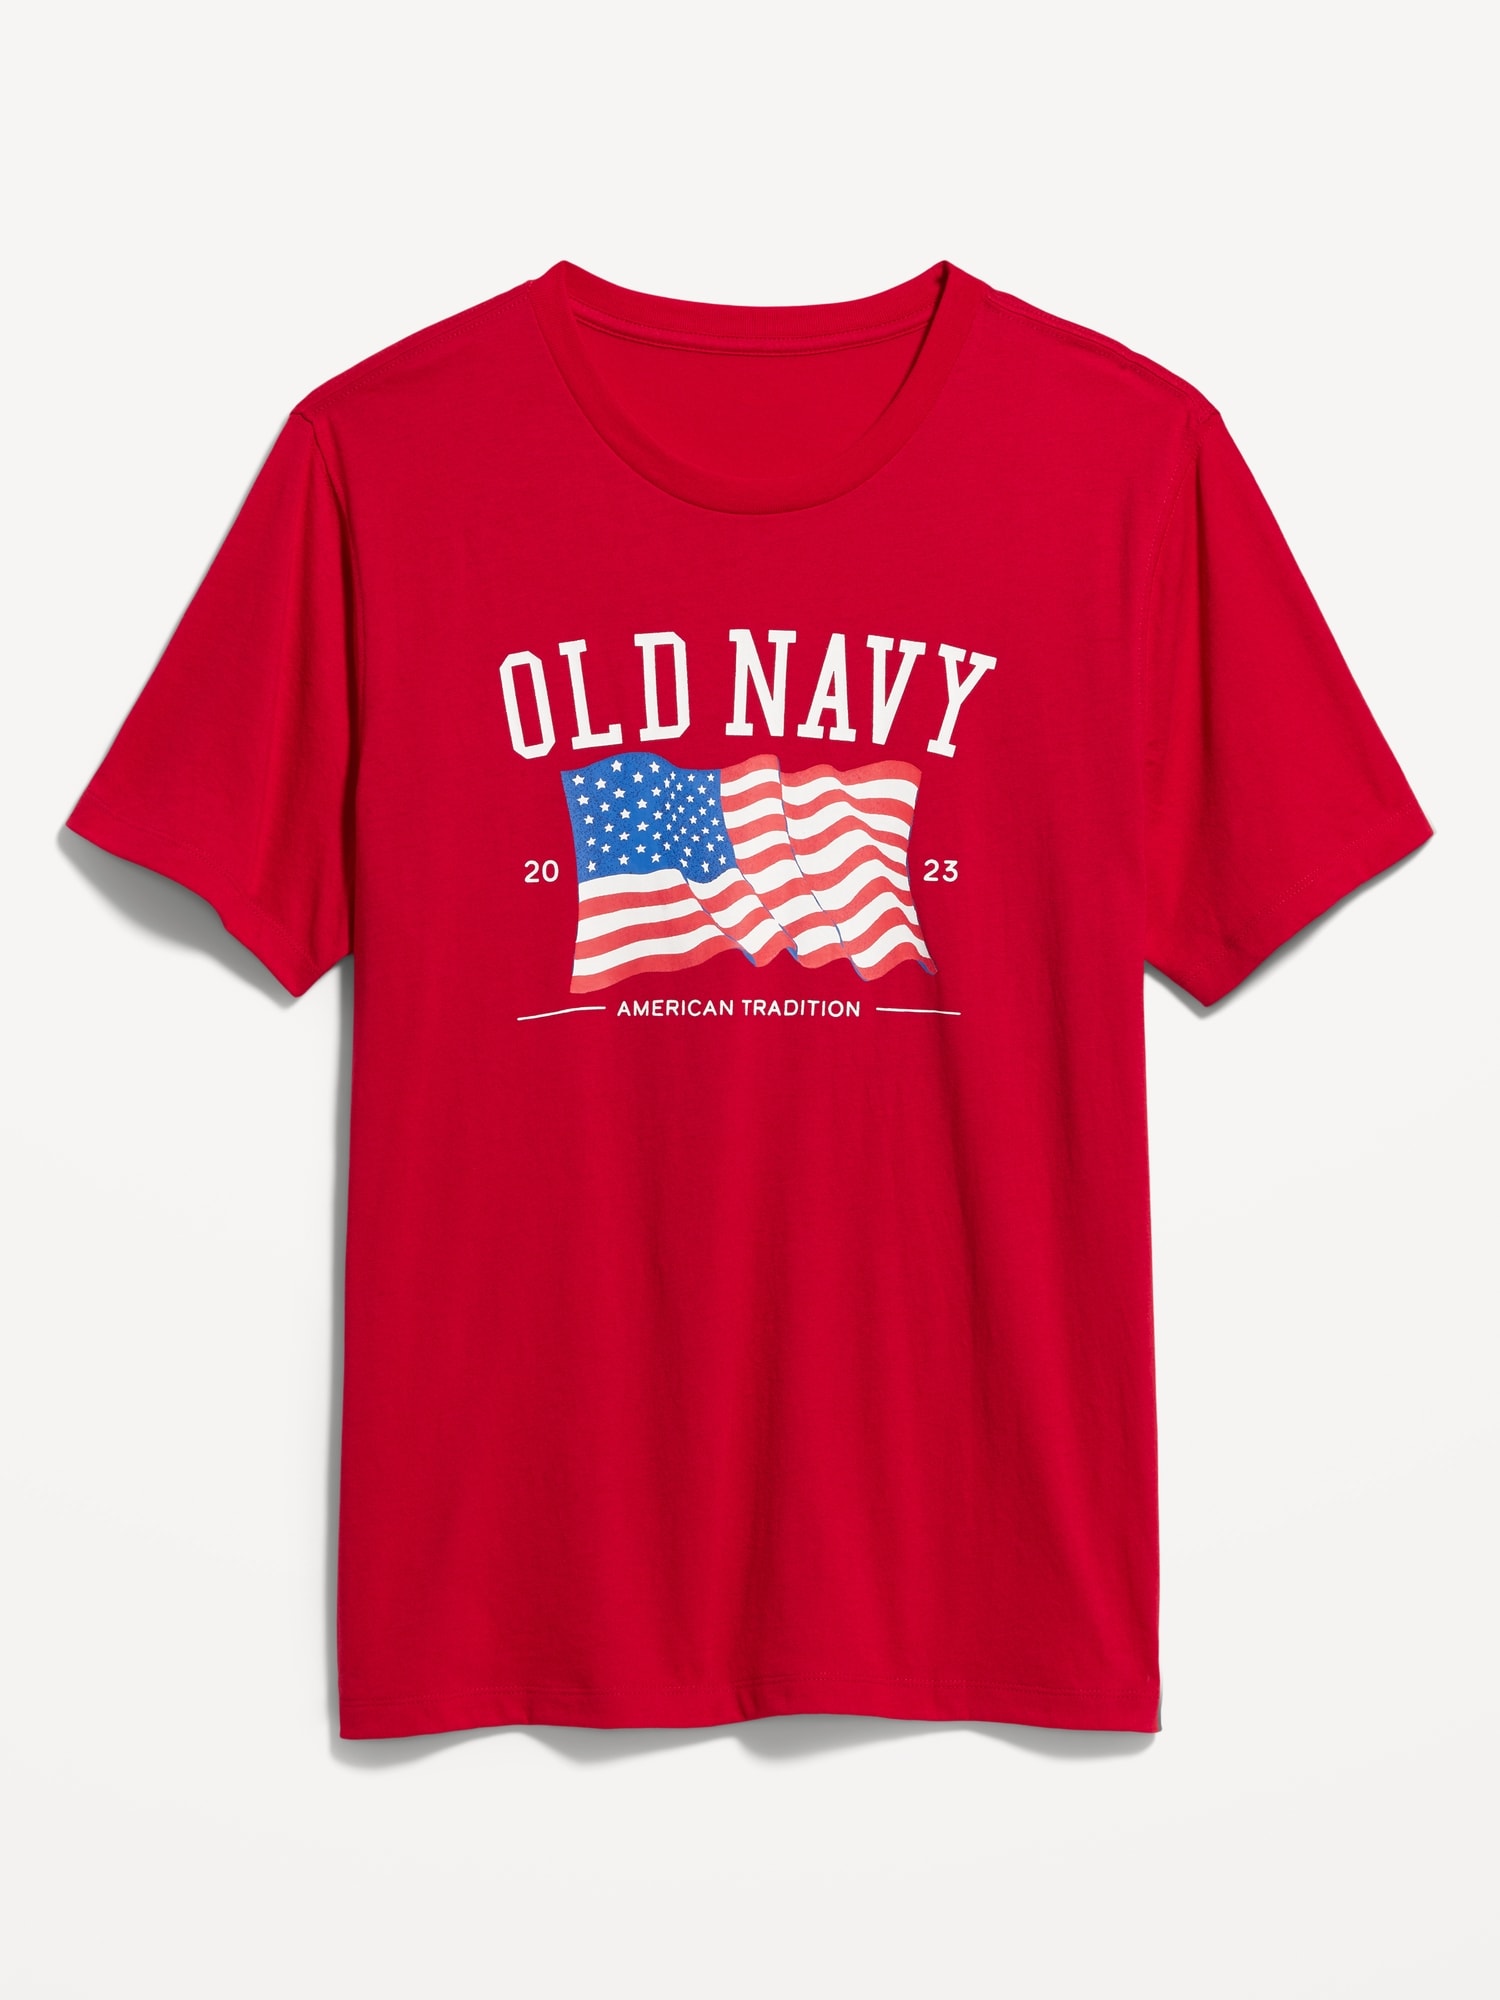 Old Navy Matching "Old Navy" Flag Graphic T-Shirt for Men red. 1